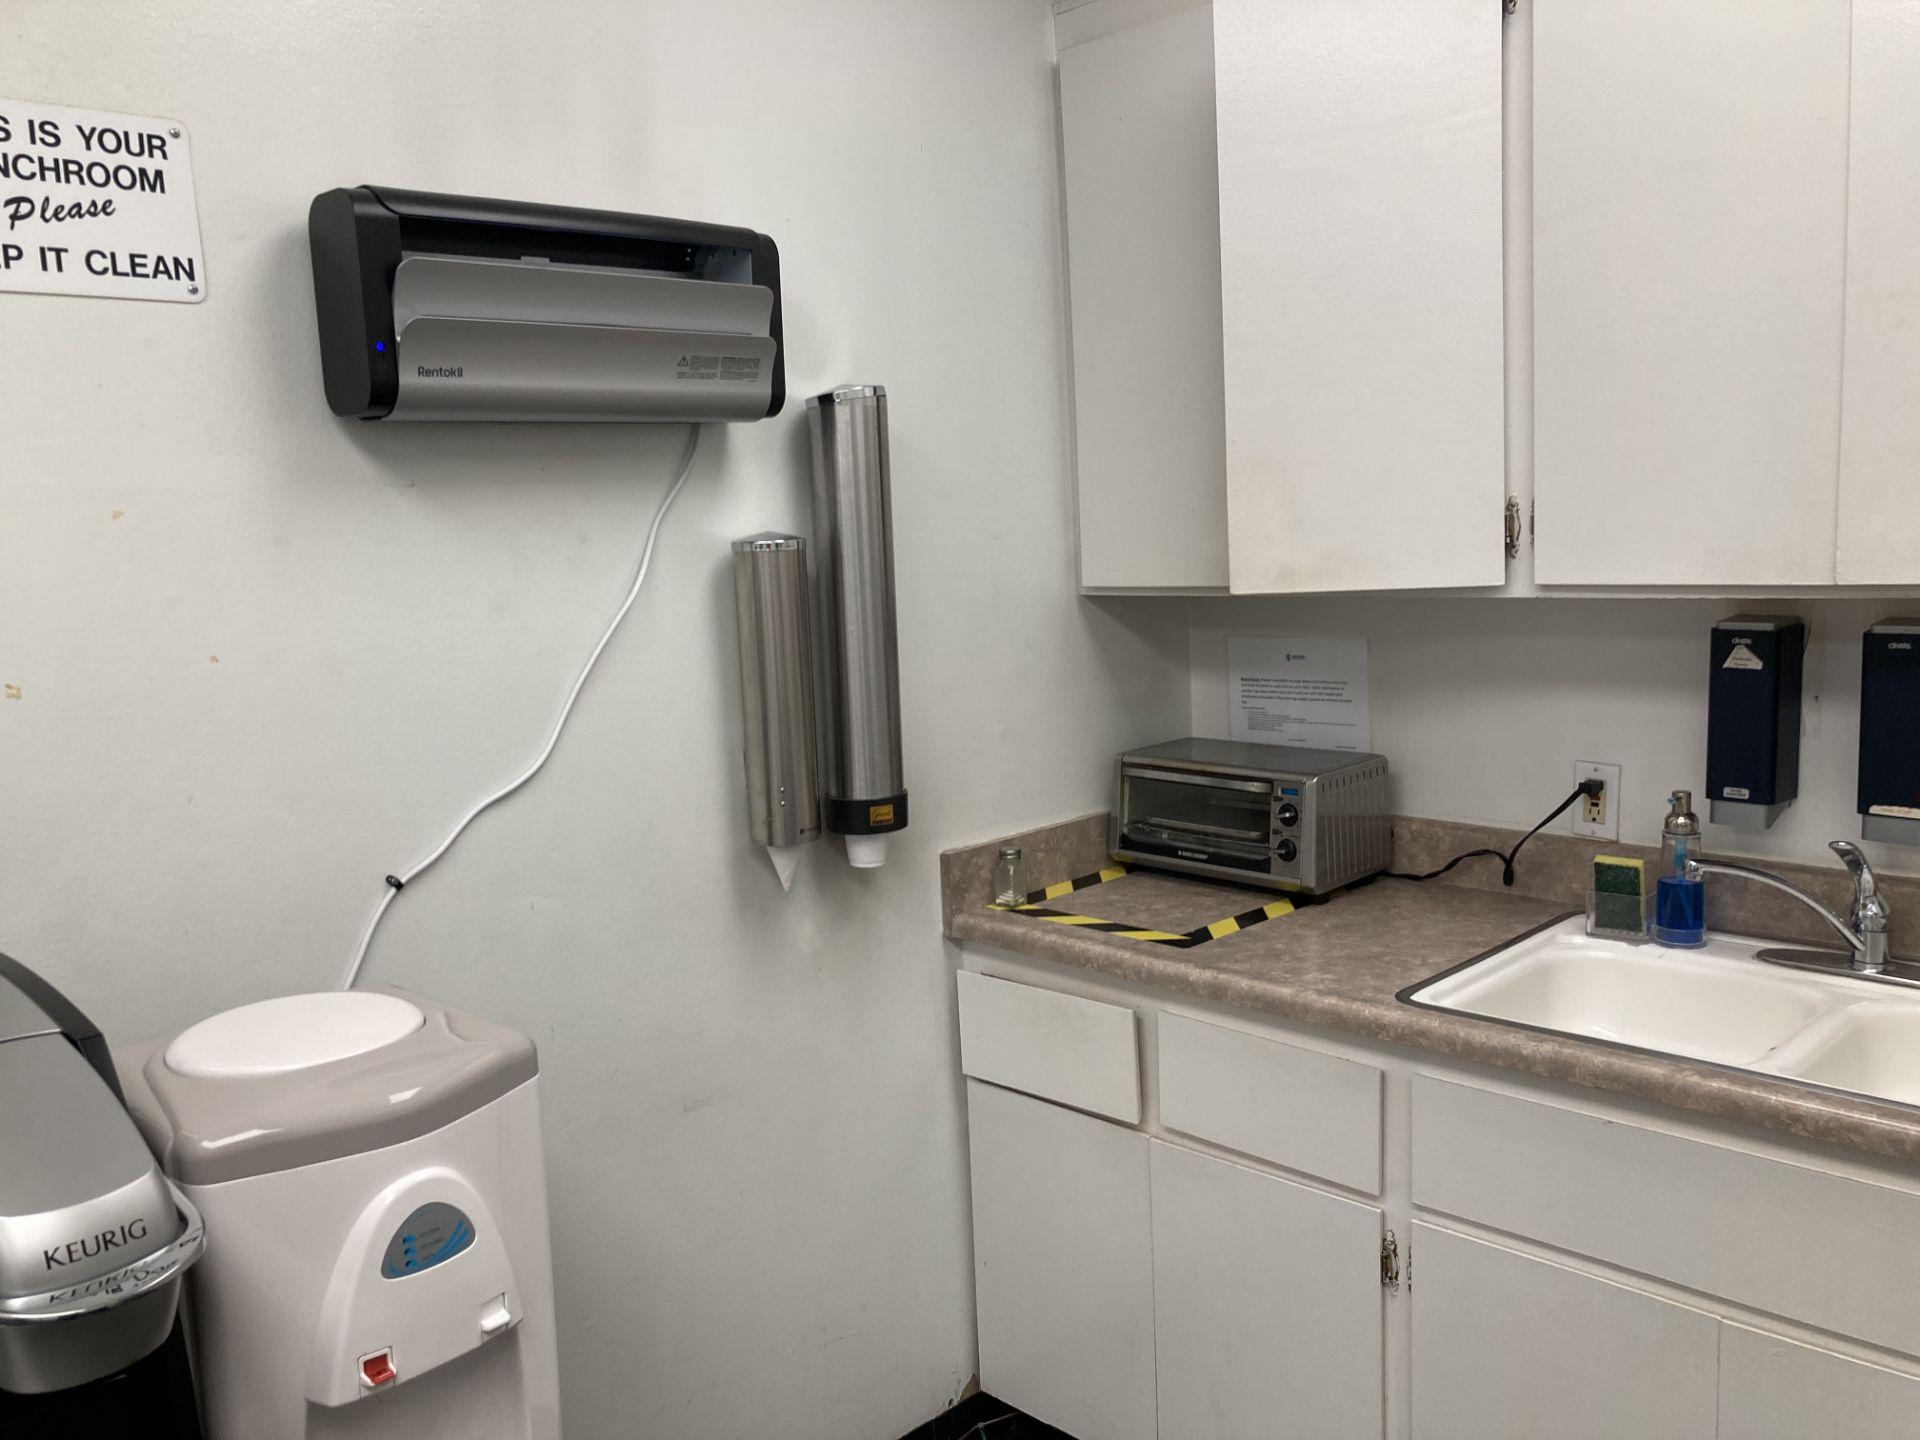 LOT OF break room, table 42 in dia, chairs, towel, cup, soap wall dispensers, microwave with cart, - Image 3 of 4